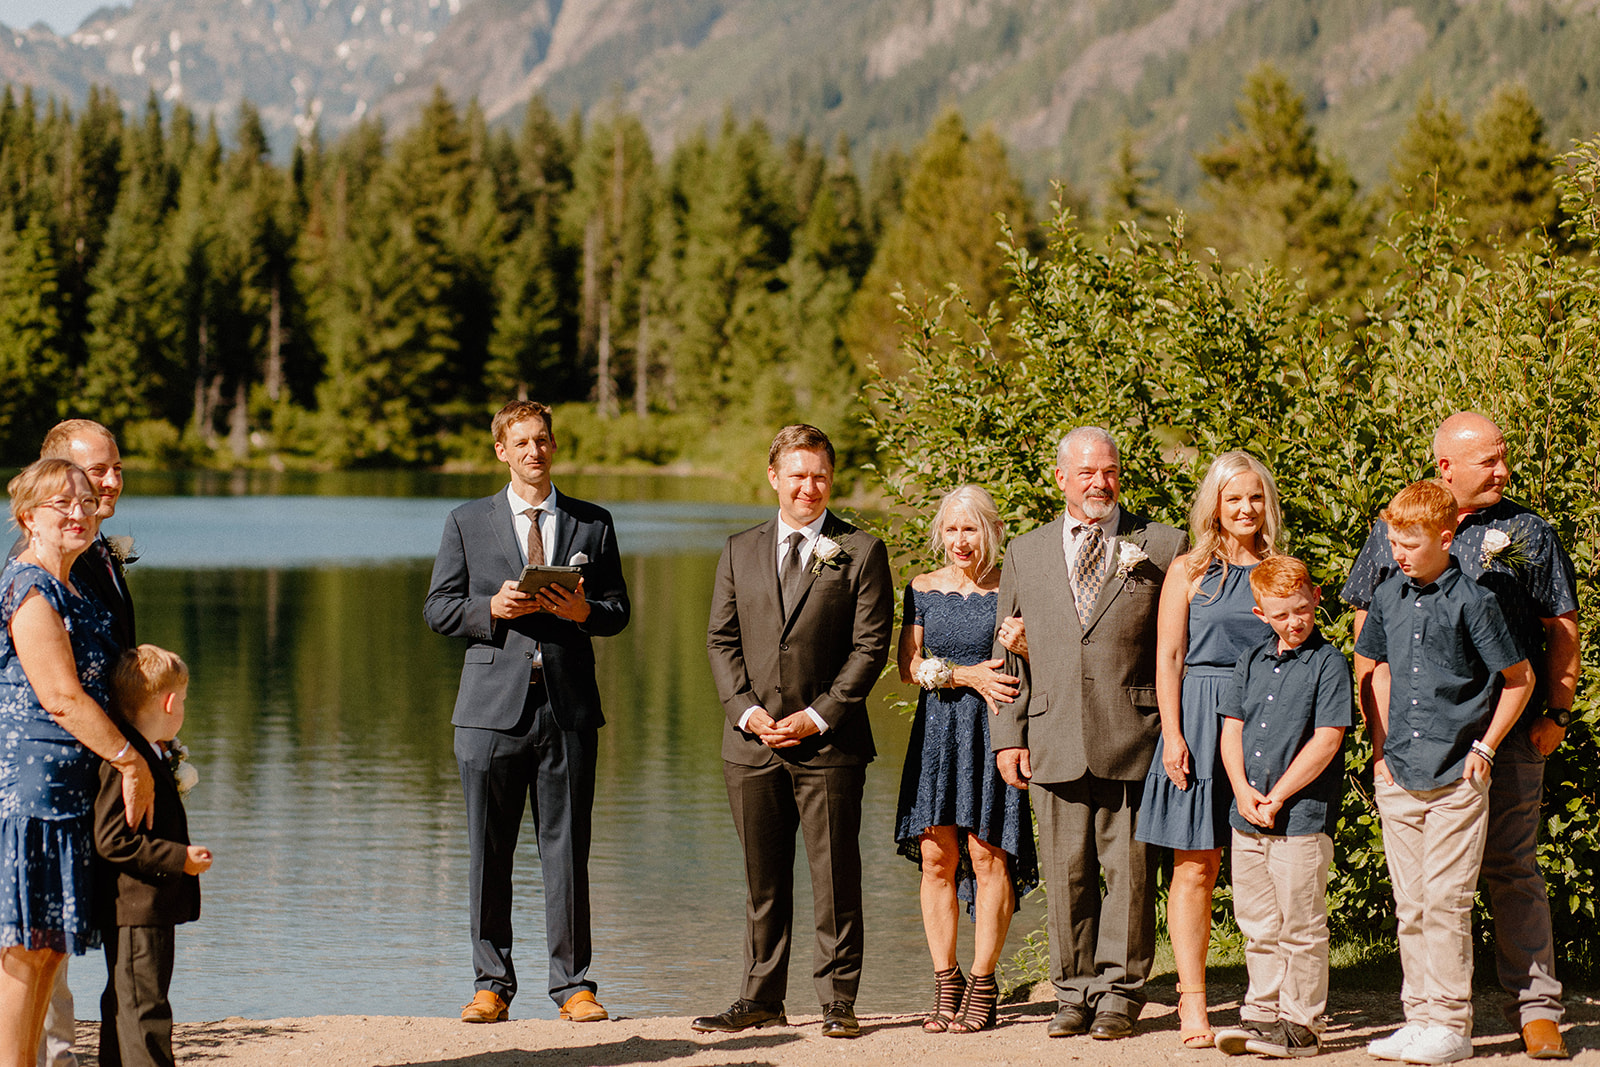 Bride and groom photos with beautiful backdrops and dreamy decor for a Gold Creek Pond Elopement